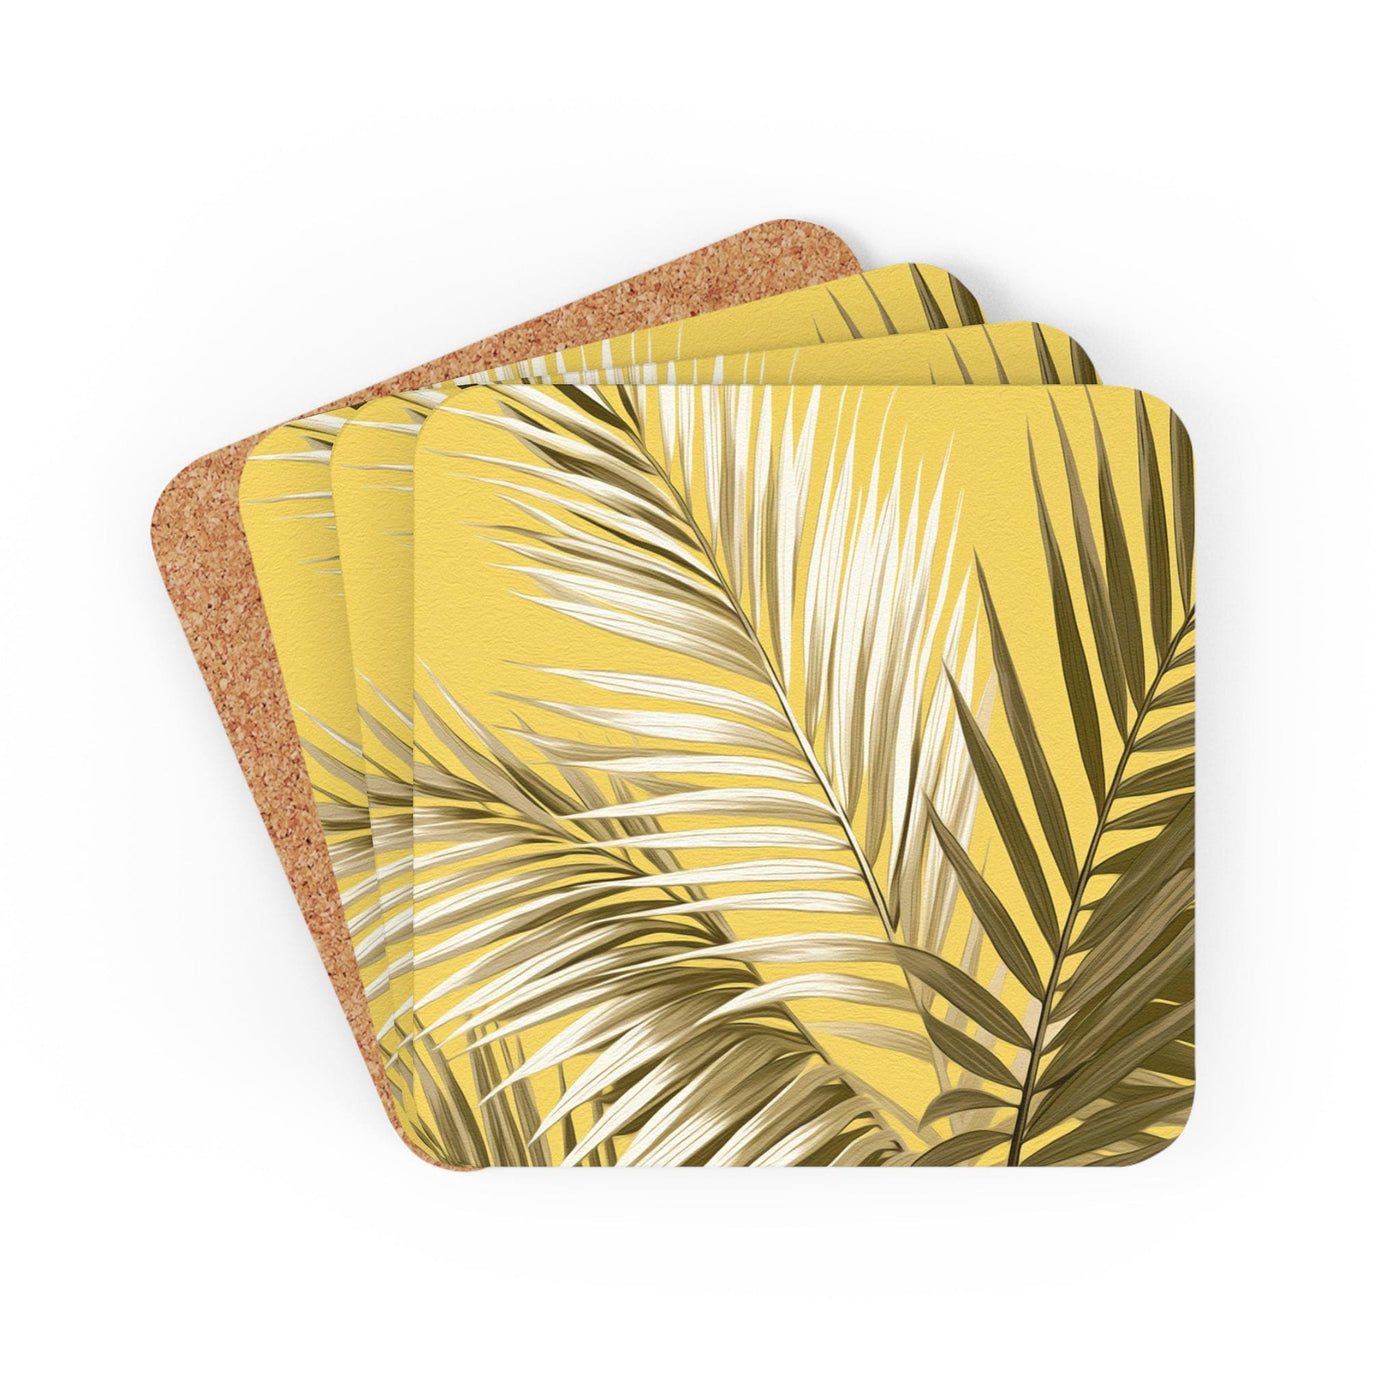 Coaster Set Of 4 For Drinks White Brown Palm Leaves - Decorative | Coasters